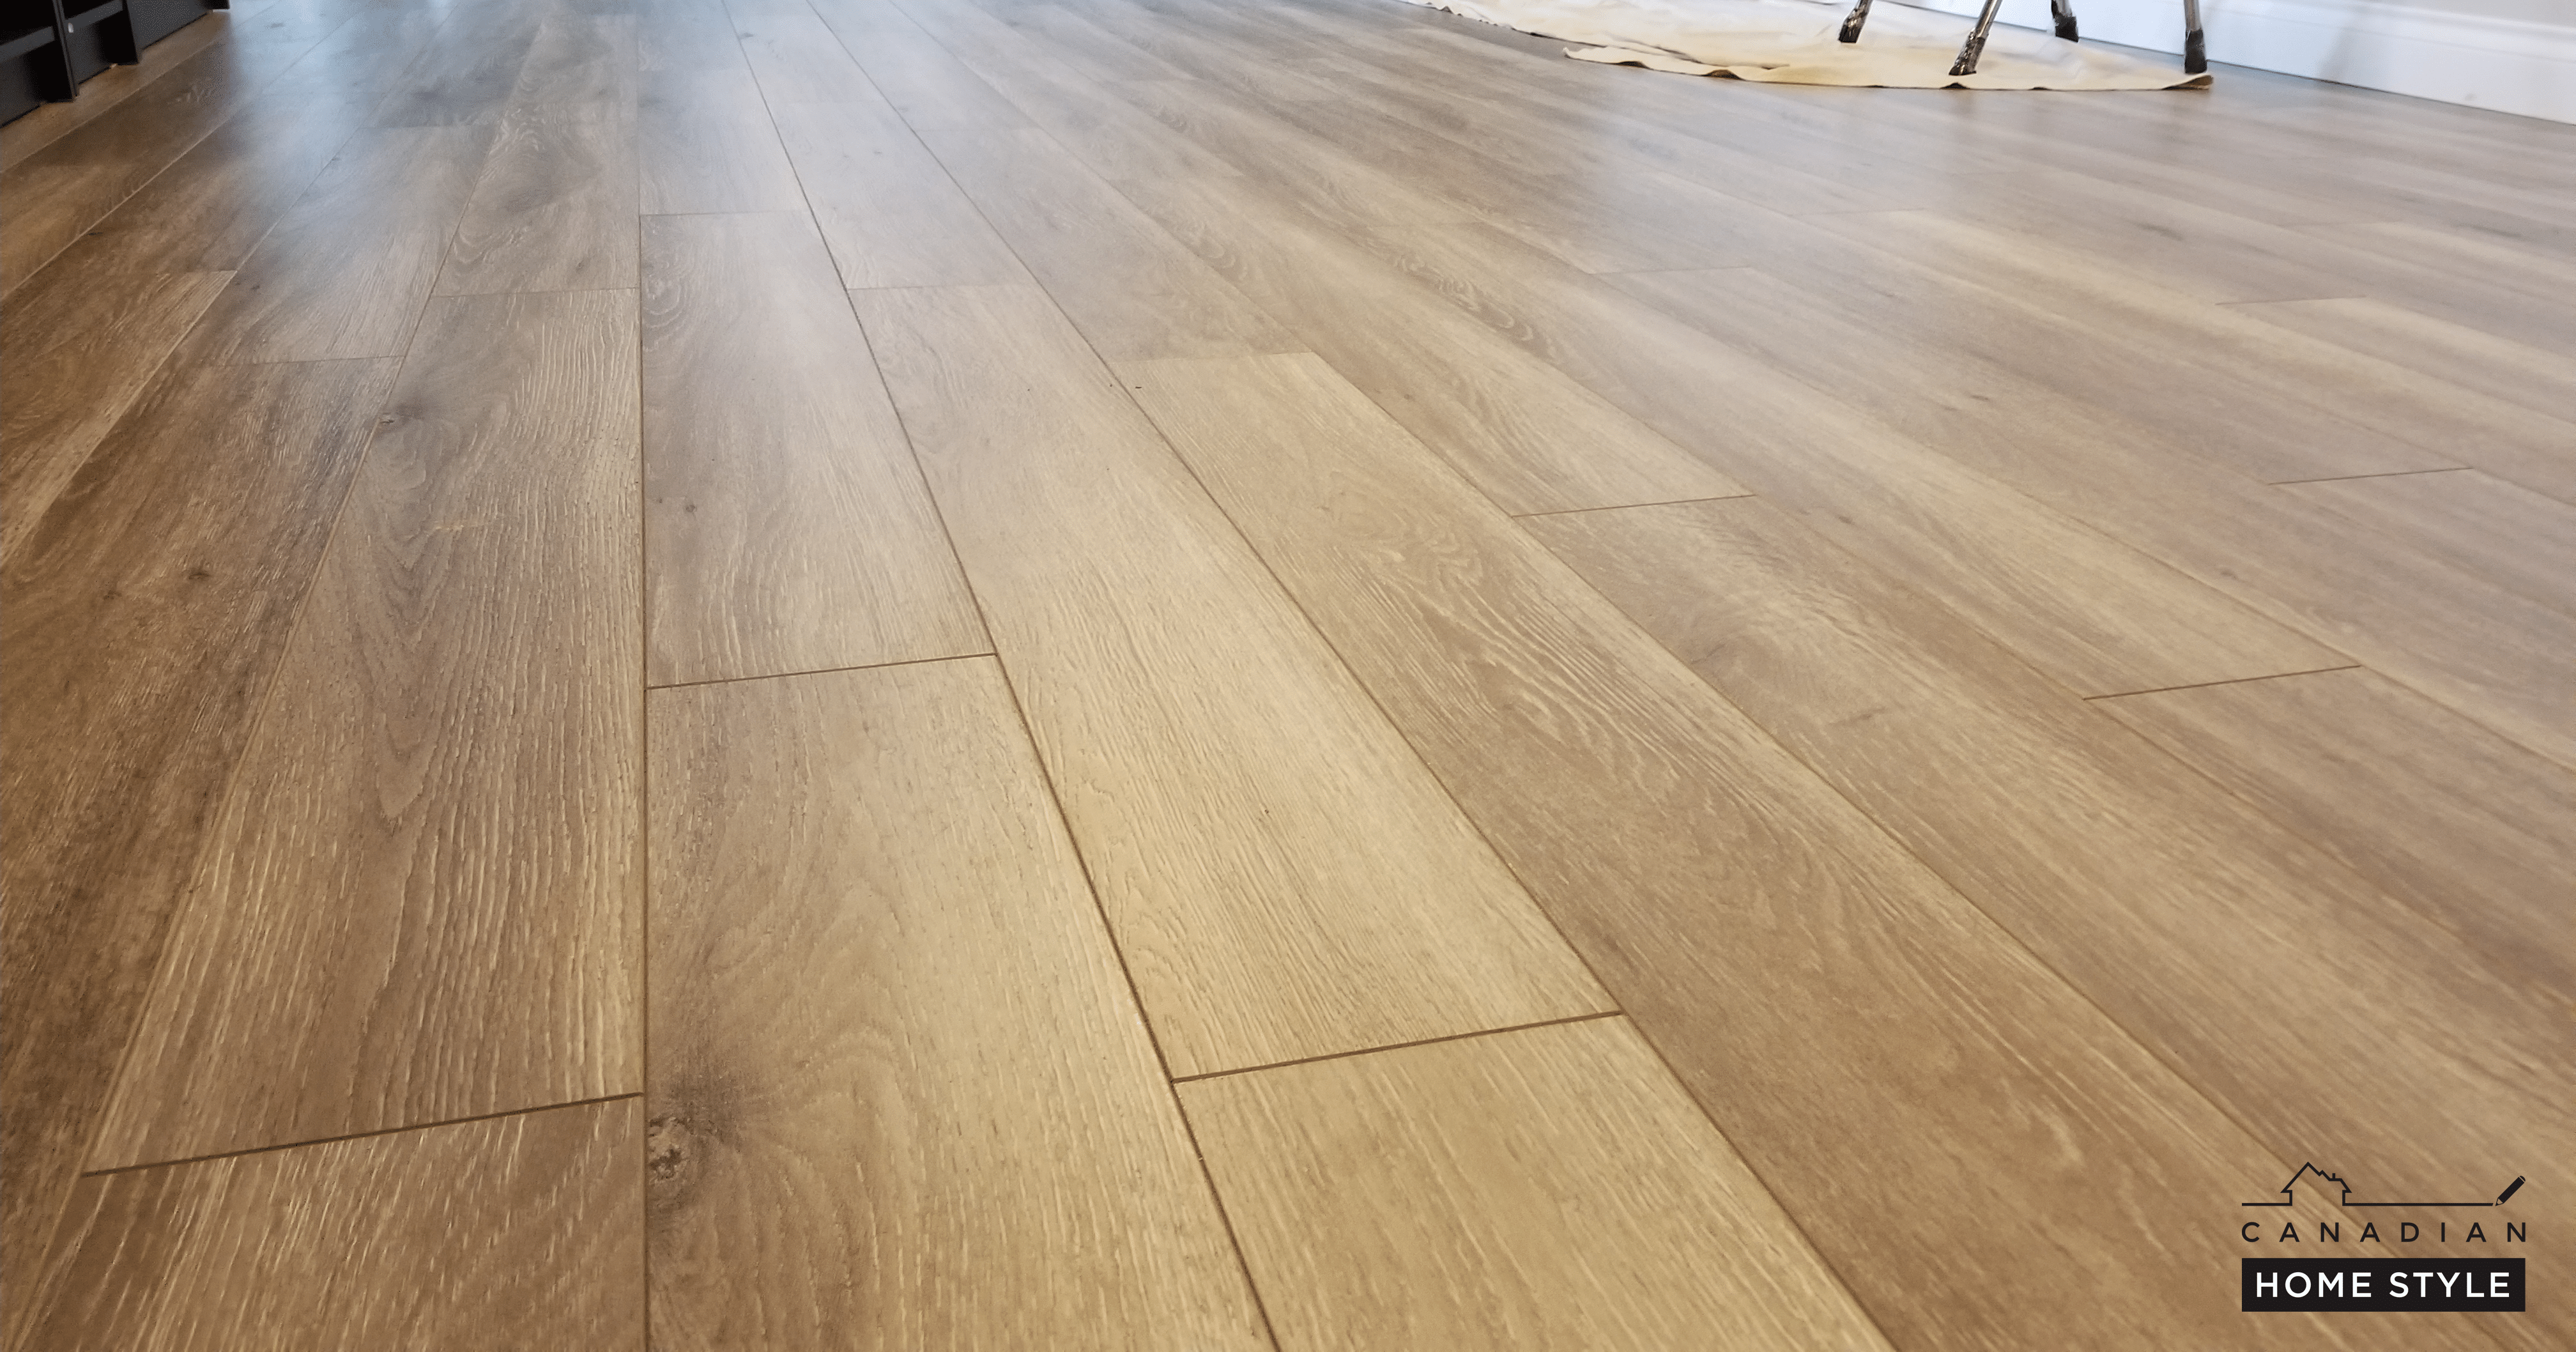 High-quality Vancouver laminate floors